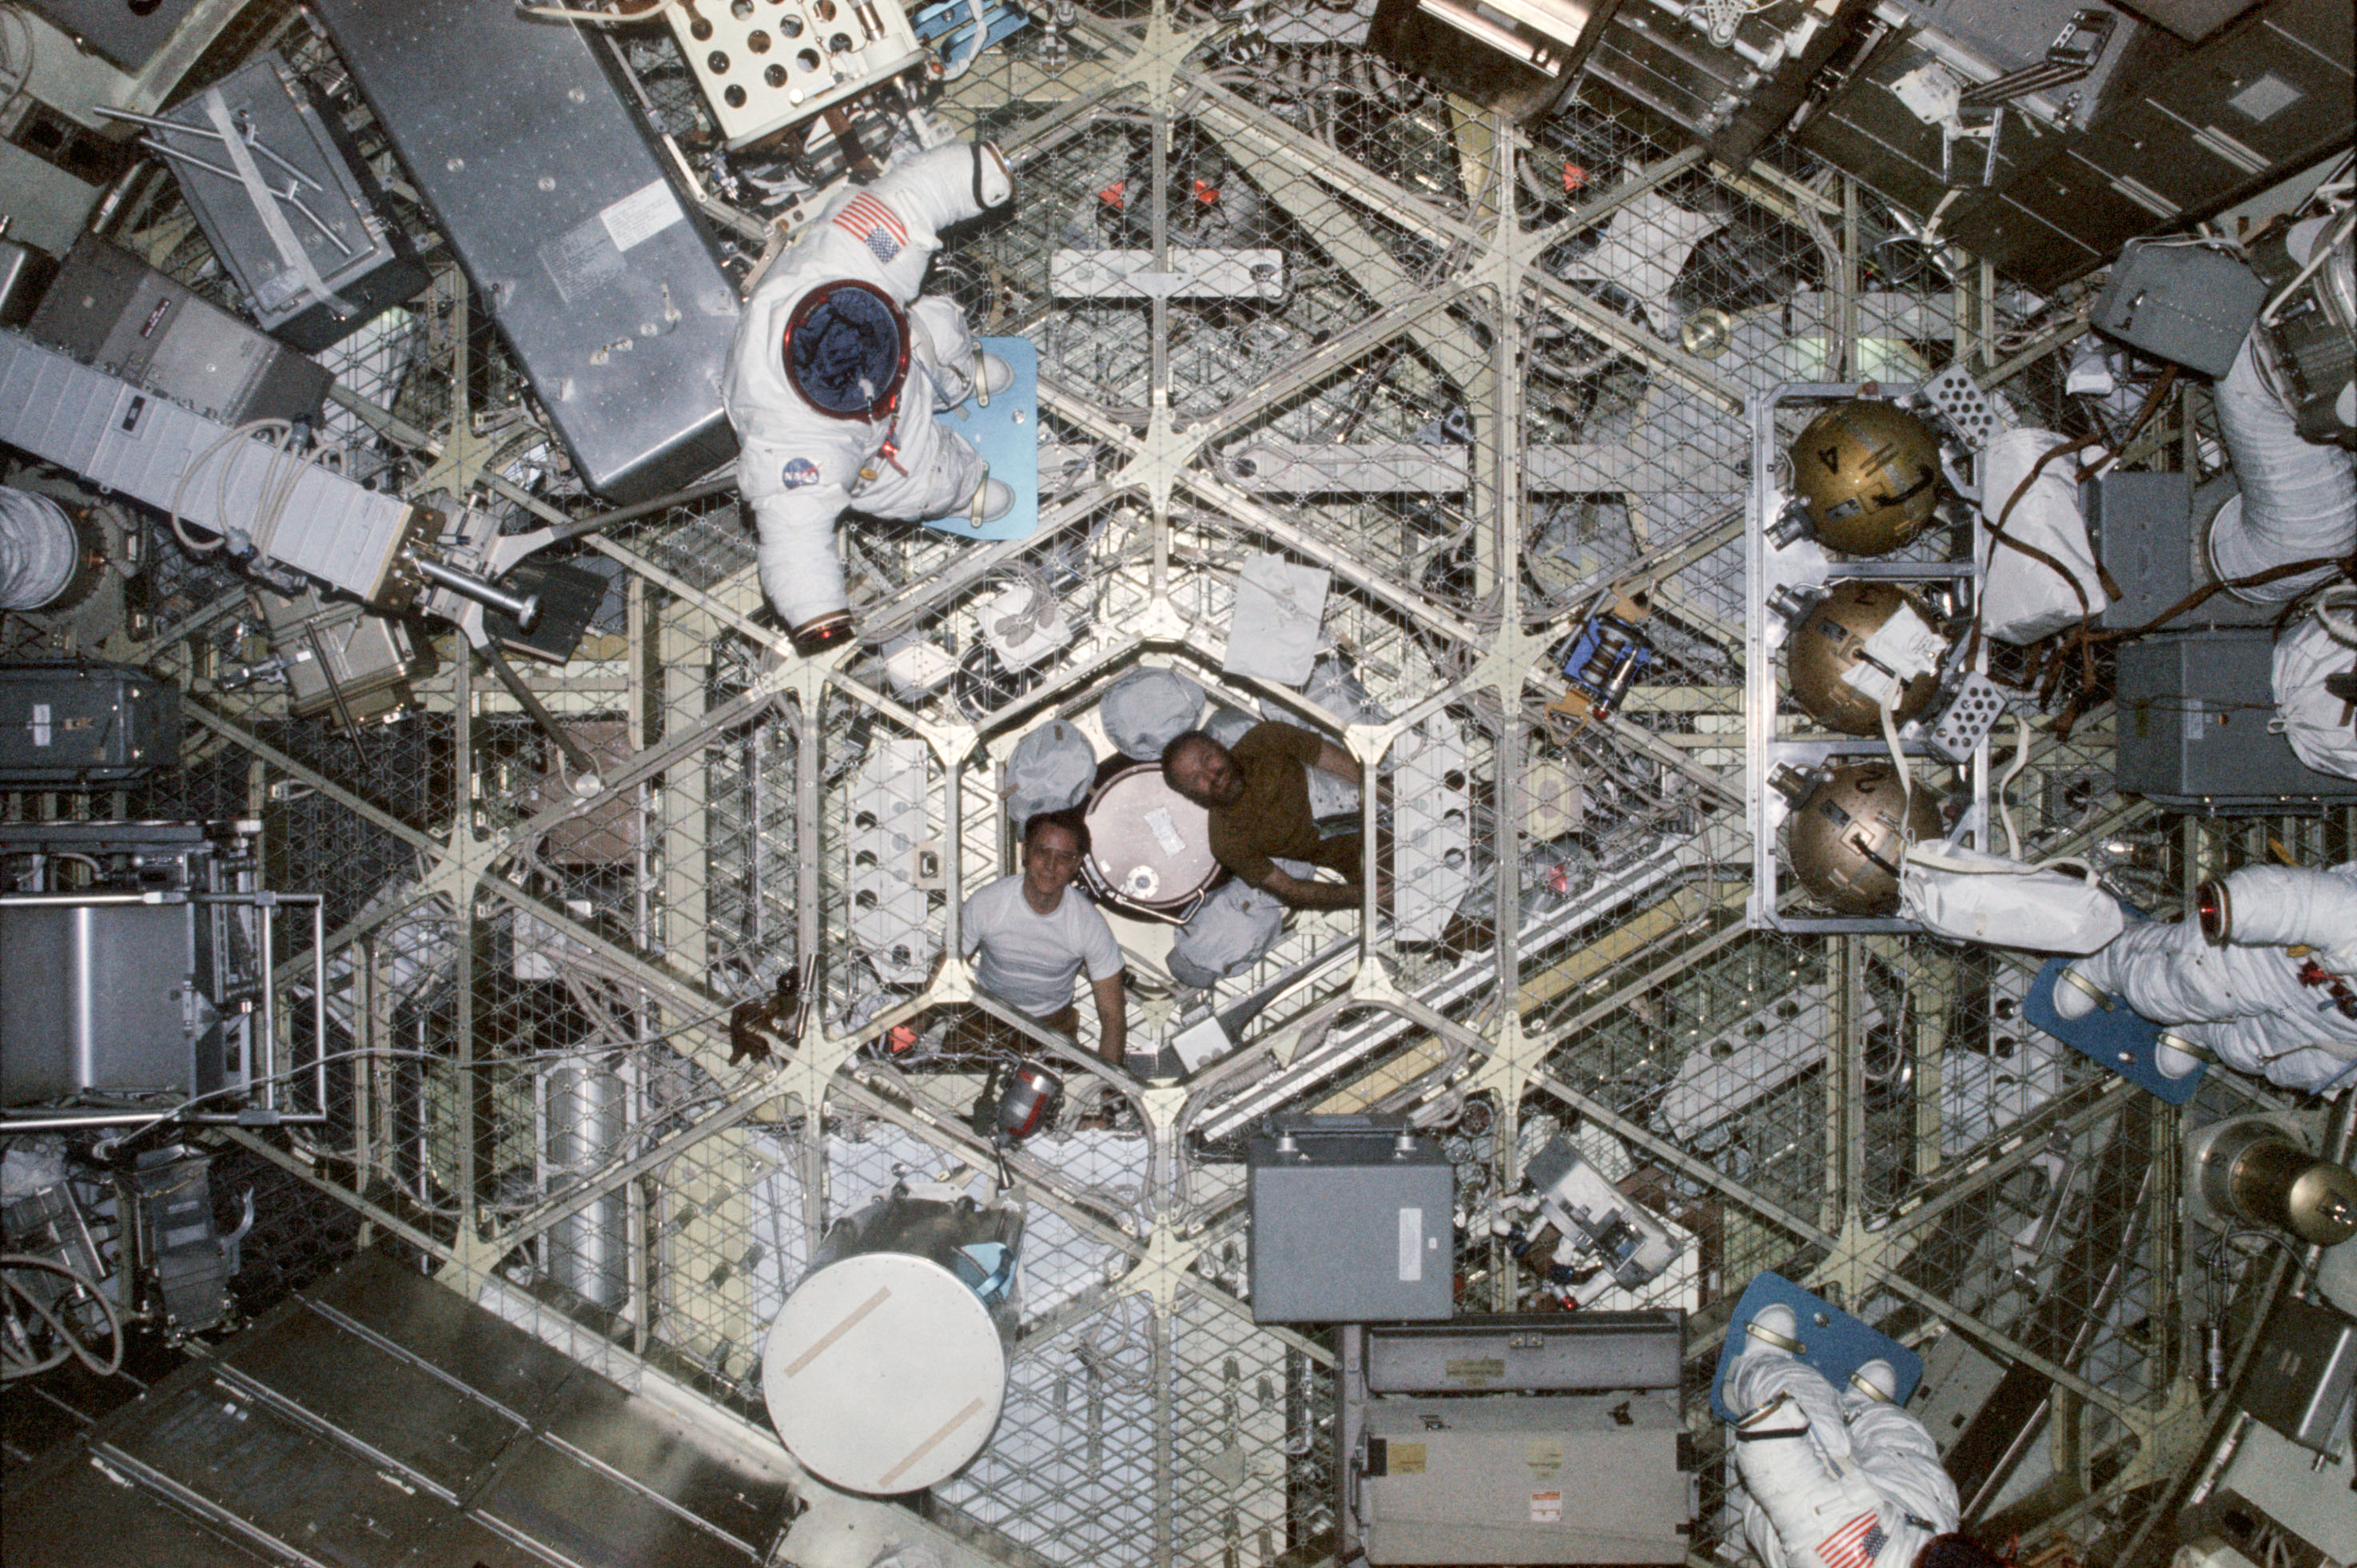 A view from Skylab's airlock hatch, looking down the length of the orbiting workshop. Skylab has a hexagon shape, with metal mesh floors that you can see through. Equipment lines the walls, and at center, two astronauts, Edward G. Gibson (left, in a white t-shirt) and Jerry P. Carr (right, in a brown t-shirt) smile for the camera. Also in frame are parts of three spacesuits.